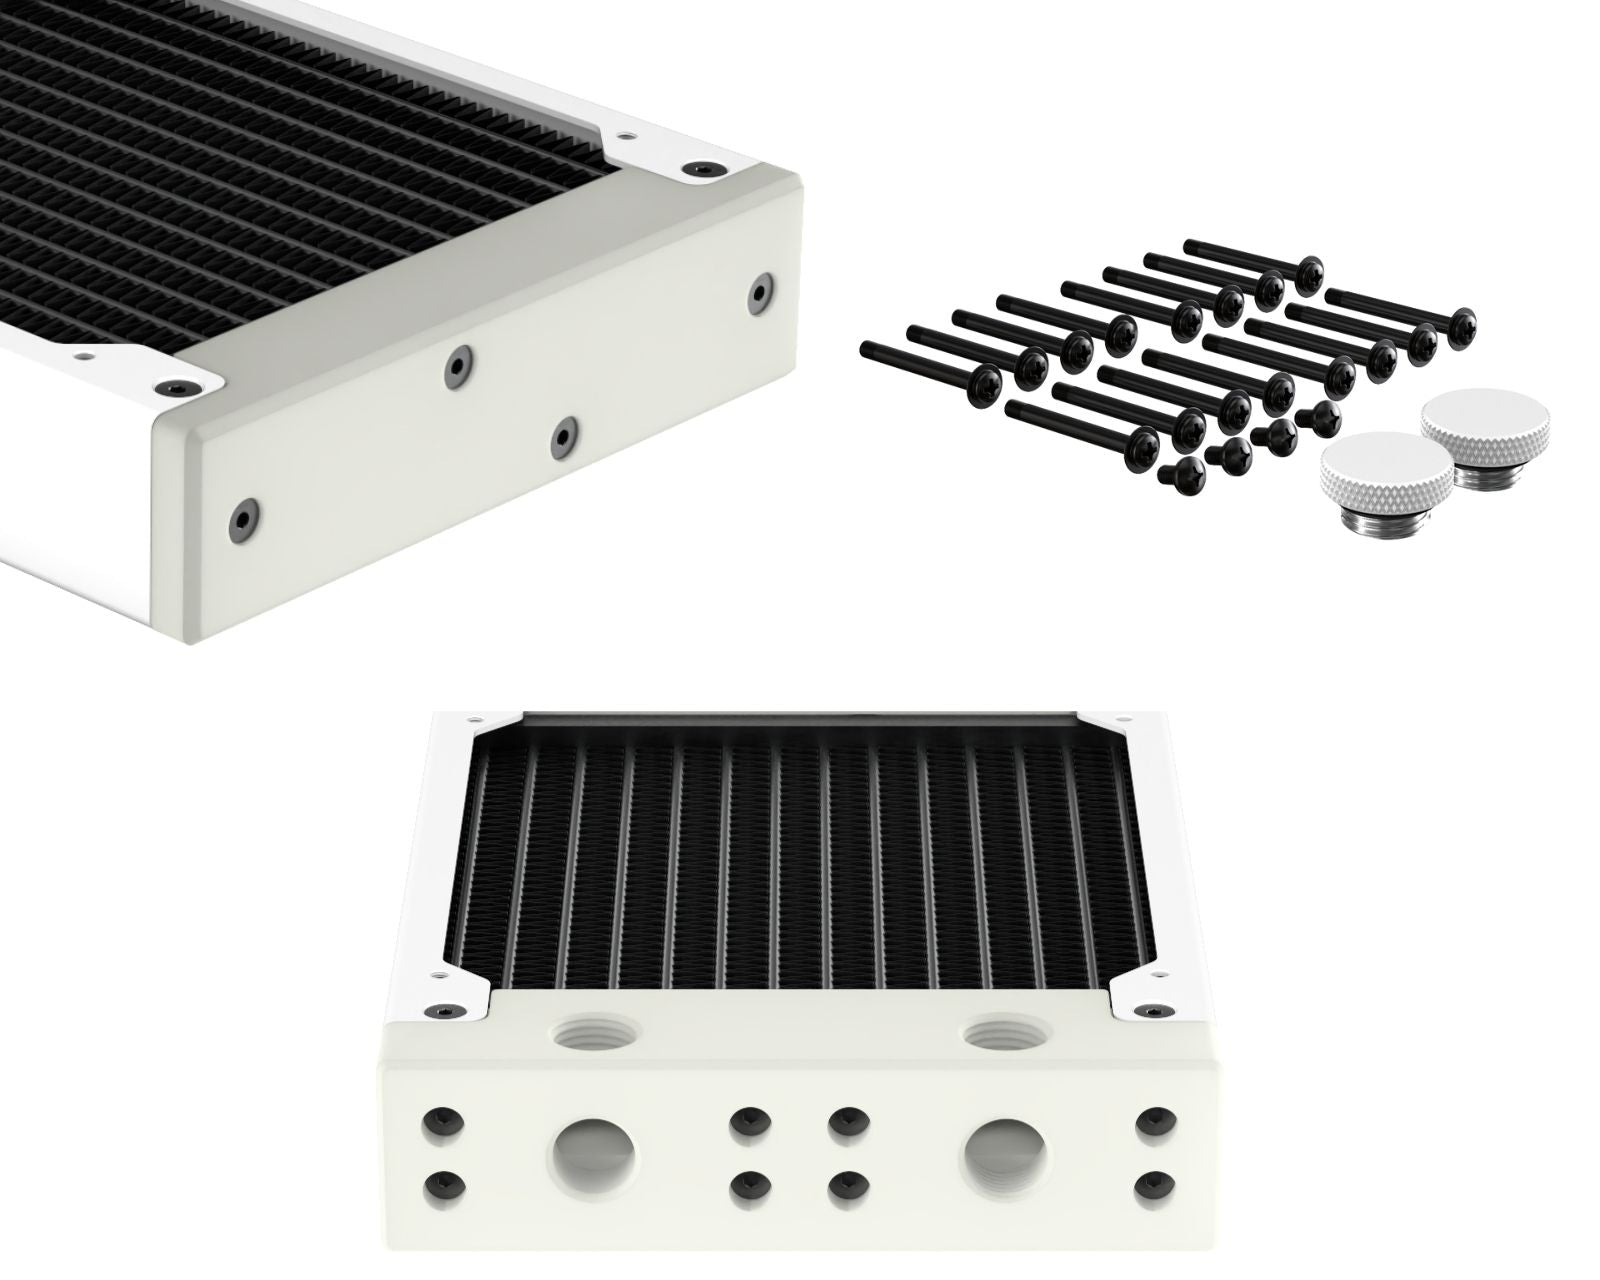 PrimoChill 480SL (30mm) EXIMO Modular Radiator, White POM, 4x120mm, Quad Fan (R-SL-W48) Available in 20+ Colors, Assembled in USA and Custom Watercooling Loop Ready - Sky White